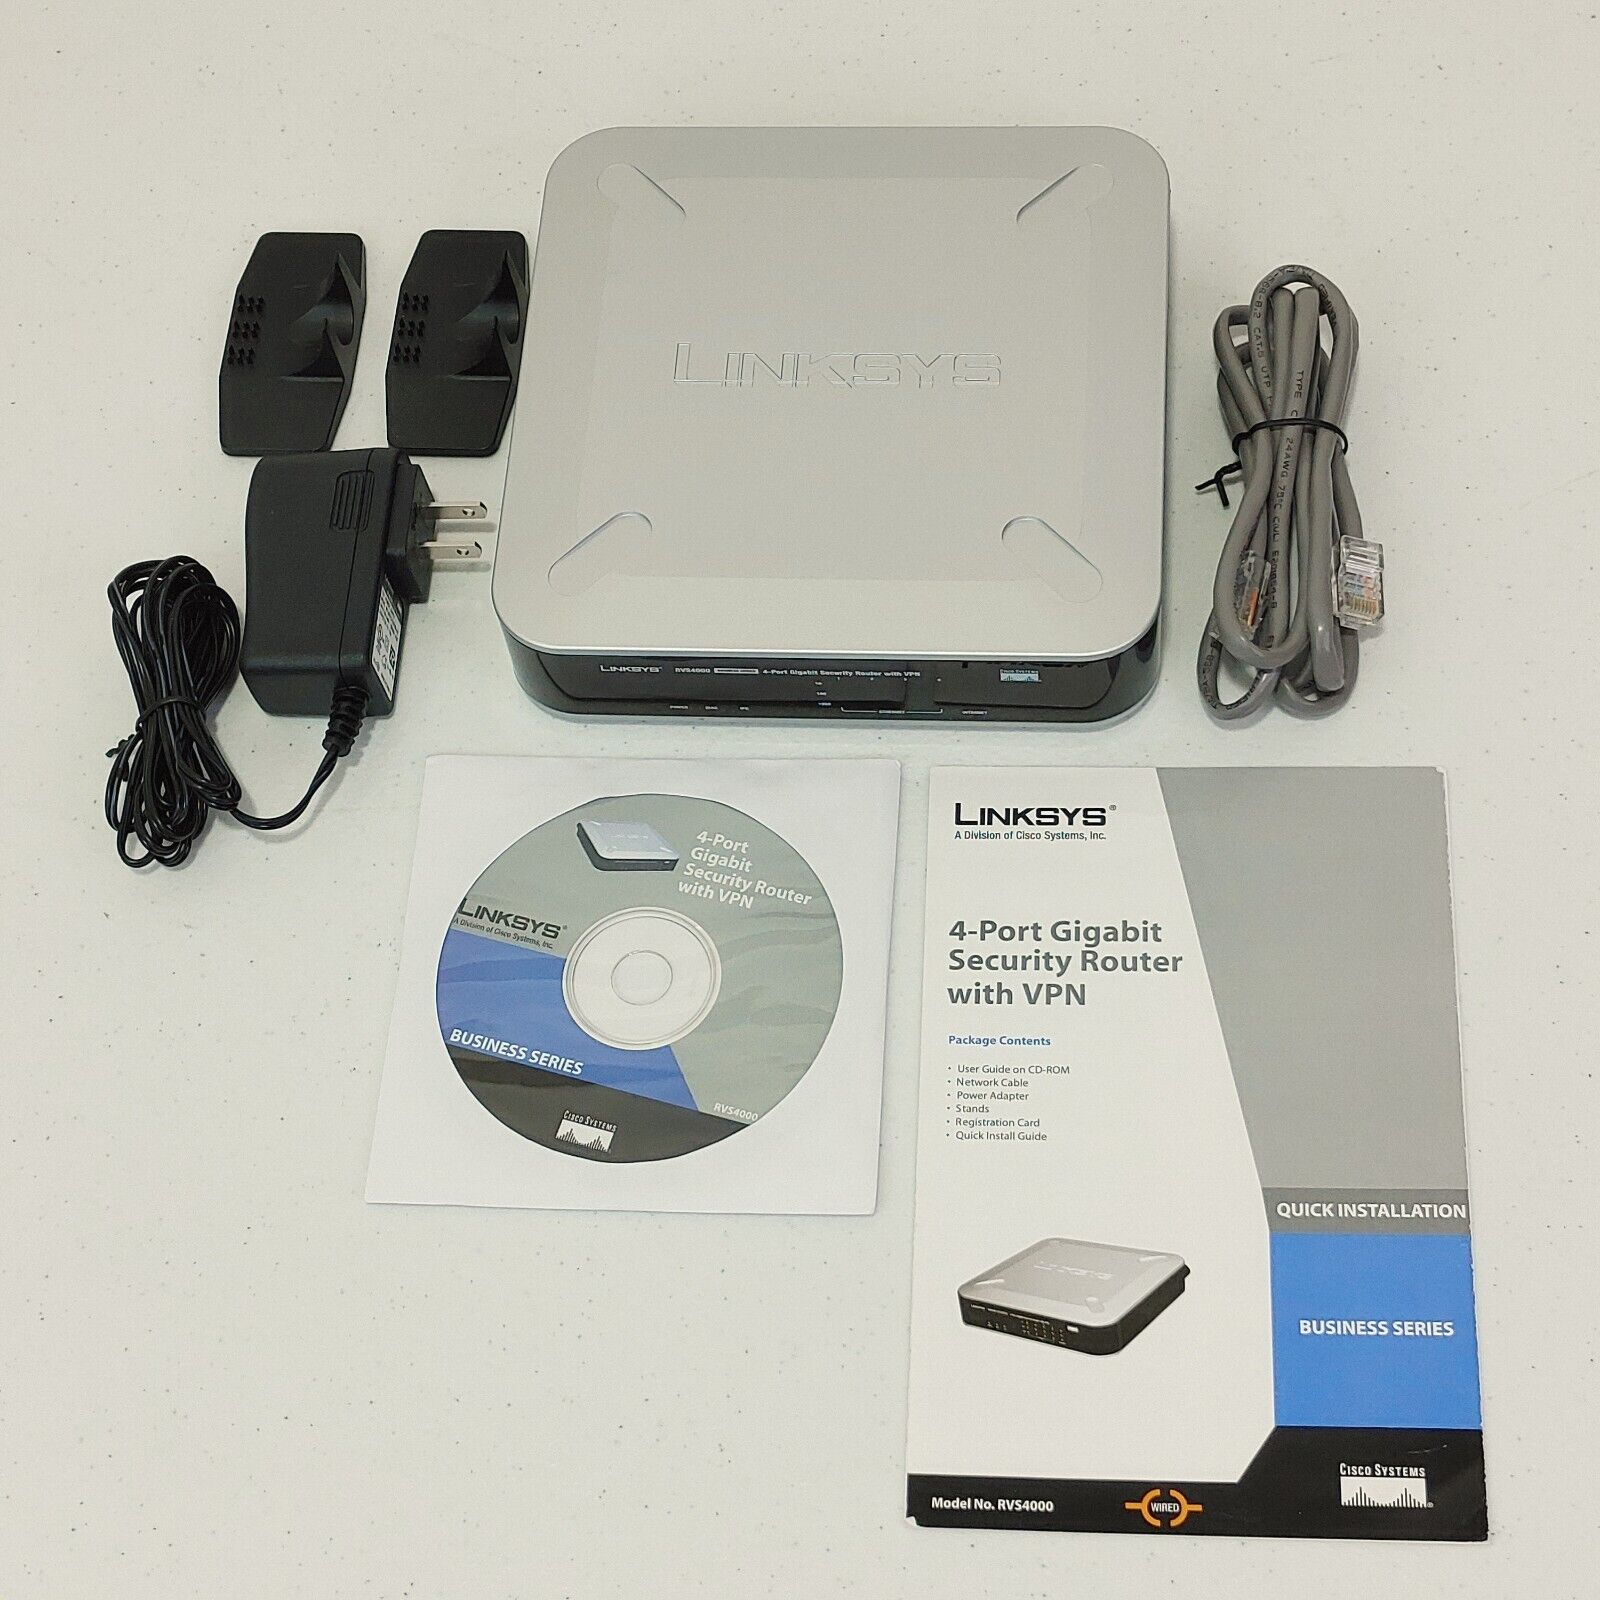 Linksys / Cisco RVS4000 4-port Gigabit Security Router with VPN Business Series